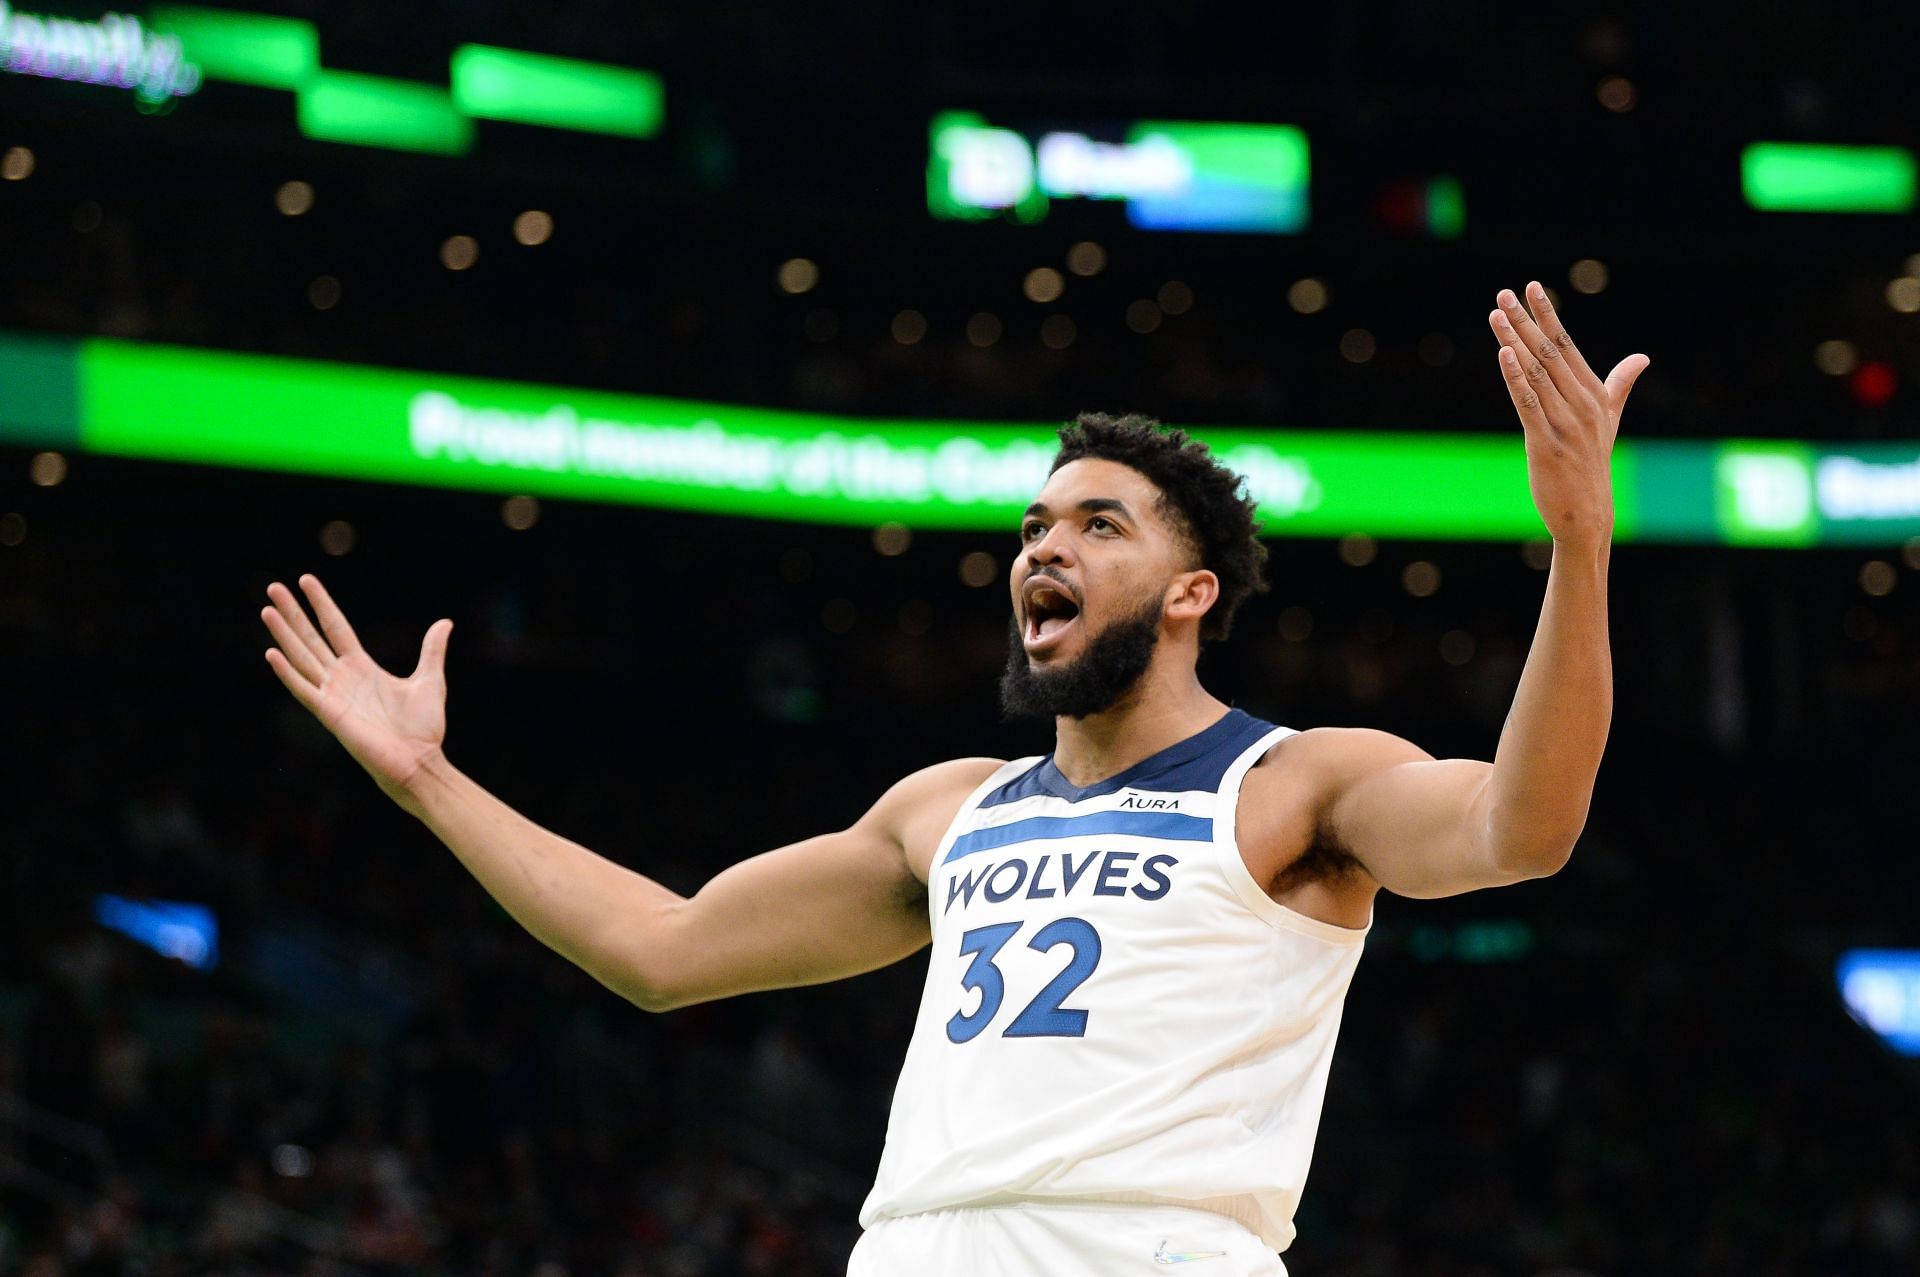 Karl-Anthony Towns will be expected to improve his offensive output in this series